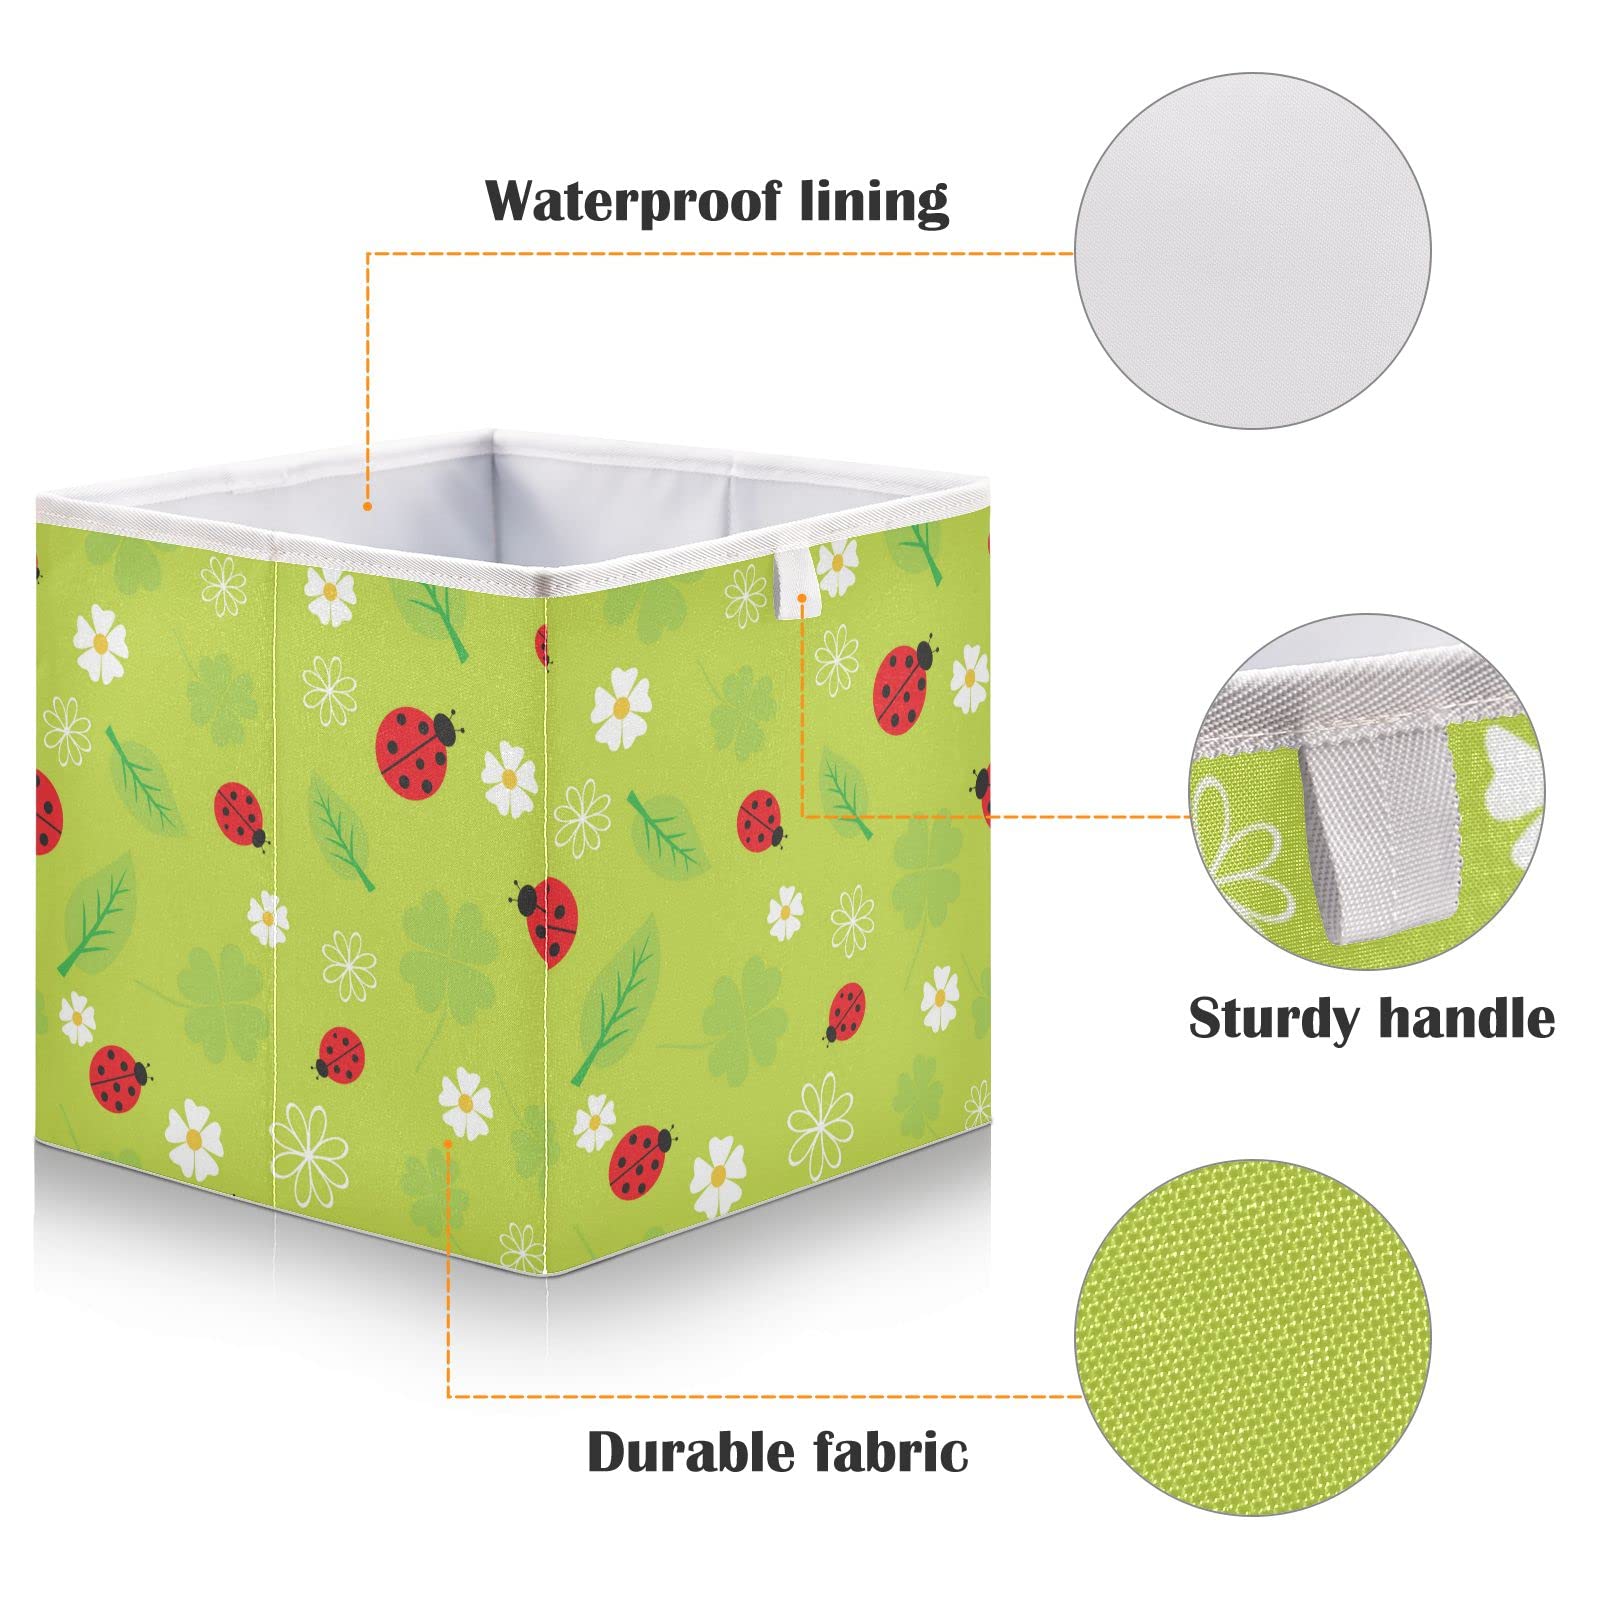 DOMIKING Beetles Ladybugs Collapsible Fabric Storage Cubes Bins with Handles Square Closet Organizer Waterproof Lining for Shelves Cabinet Nursery Drawer 11.02x11.02x11.02 Inches